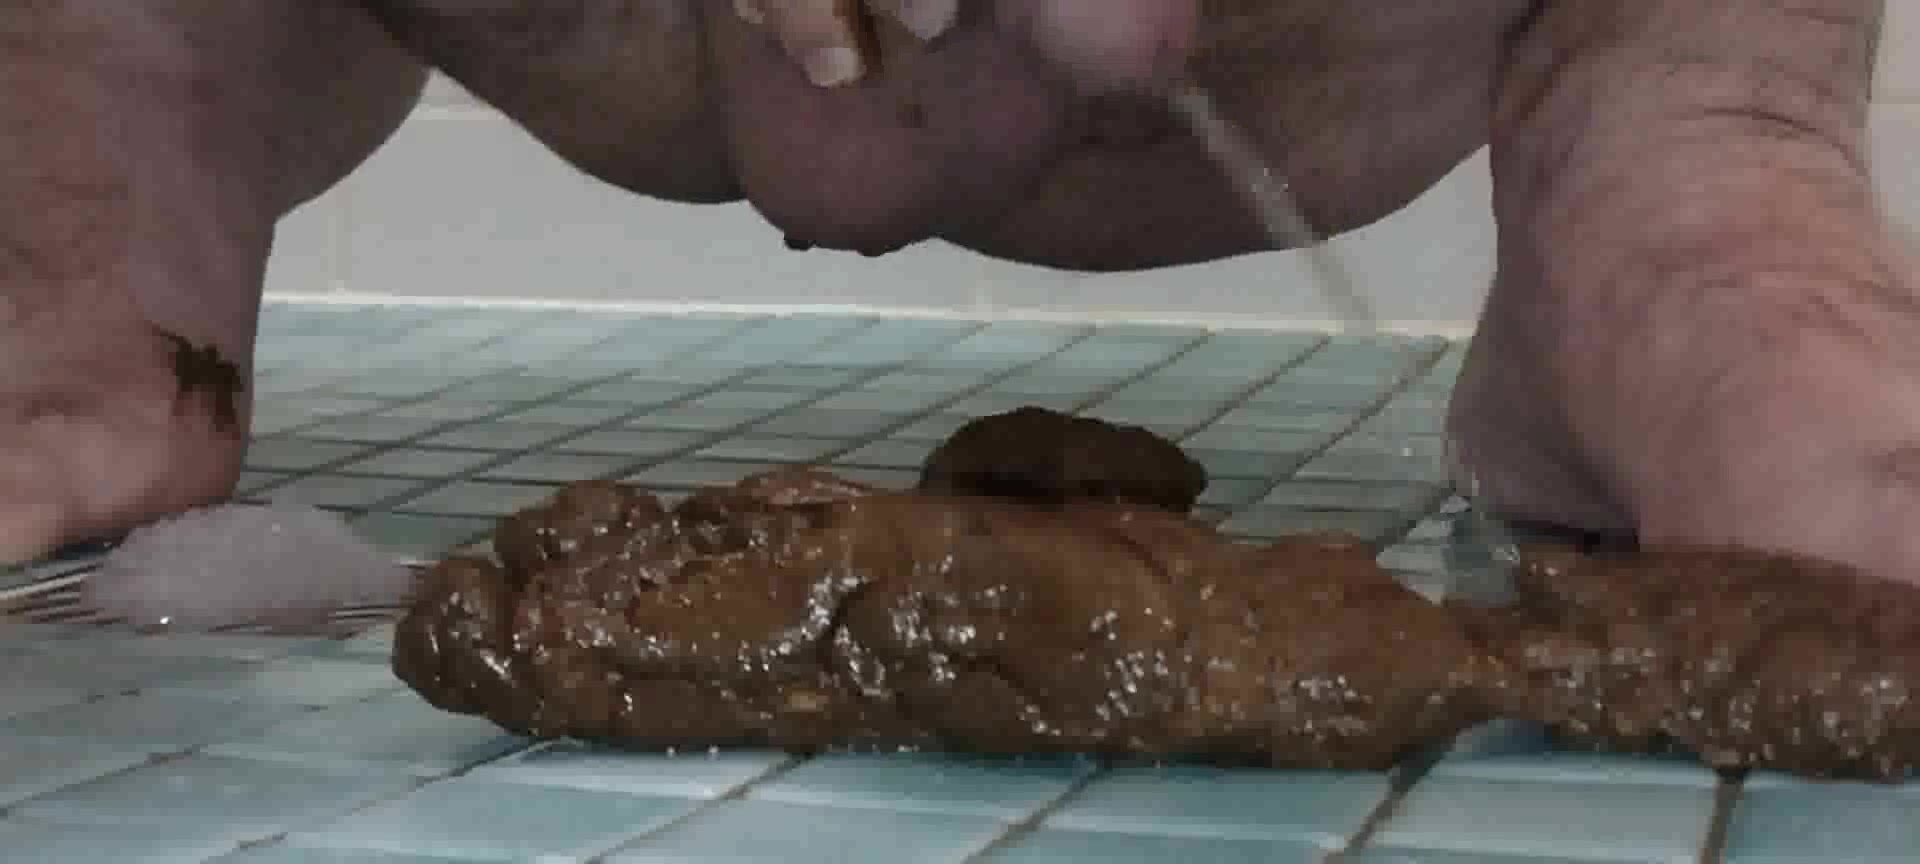 shit a long turd in bathroom and piss